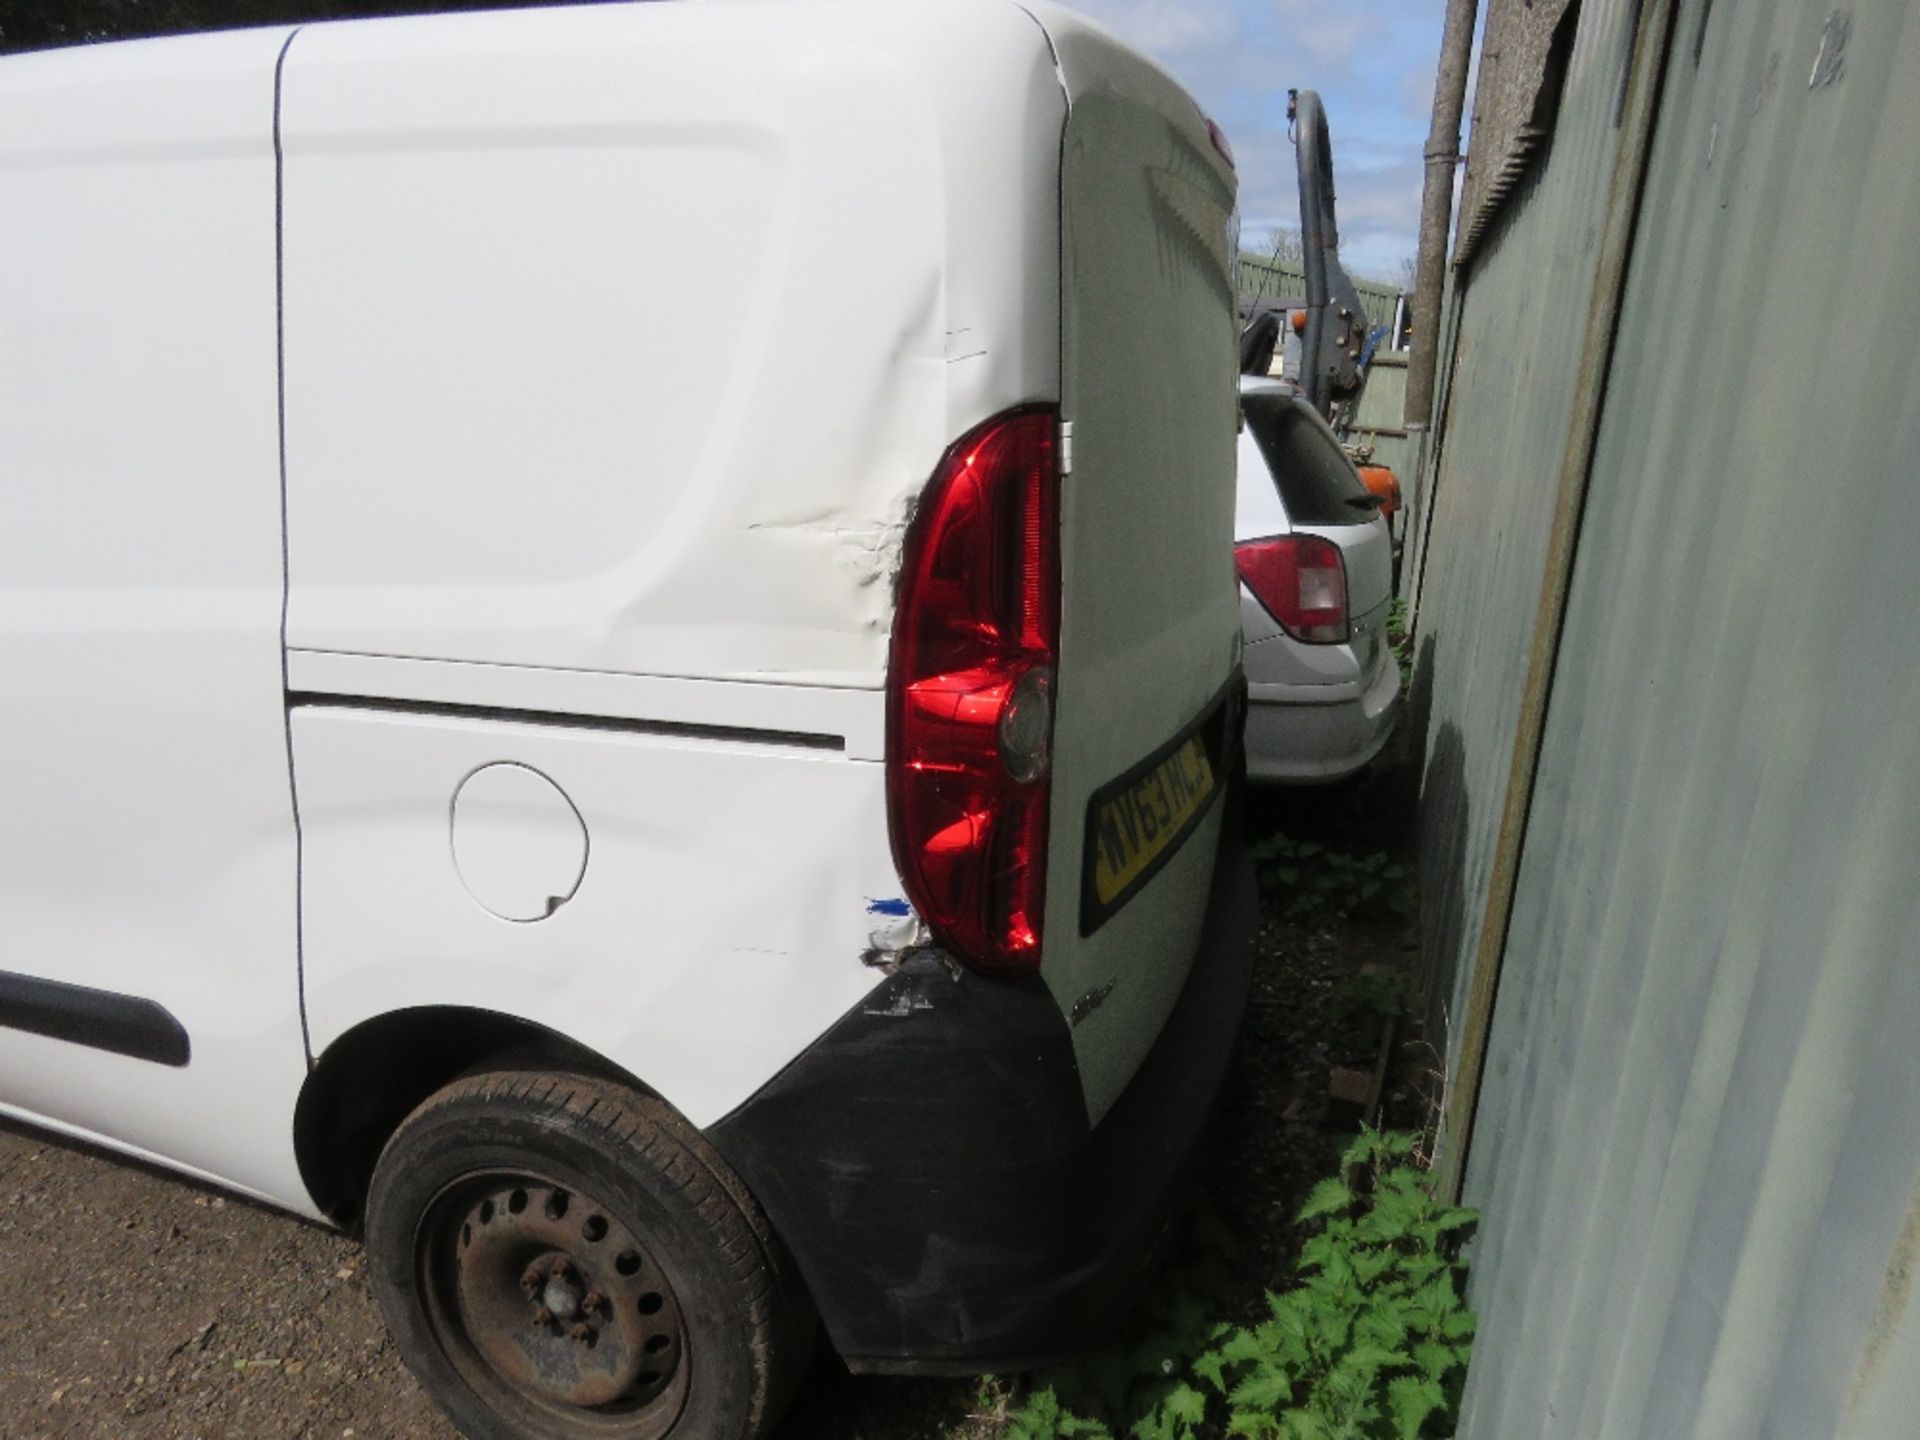 FIAT DOBLO PANEL VAN REG: WV63 HCJ. 84343 REC MILES. WHEN TESTED WAS SEEN TO DRIVE, STEER AND BRAKE. - Image 5 of 12